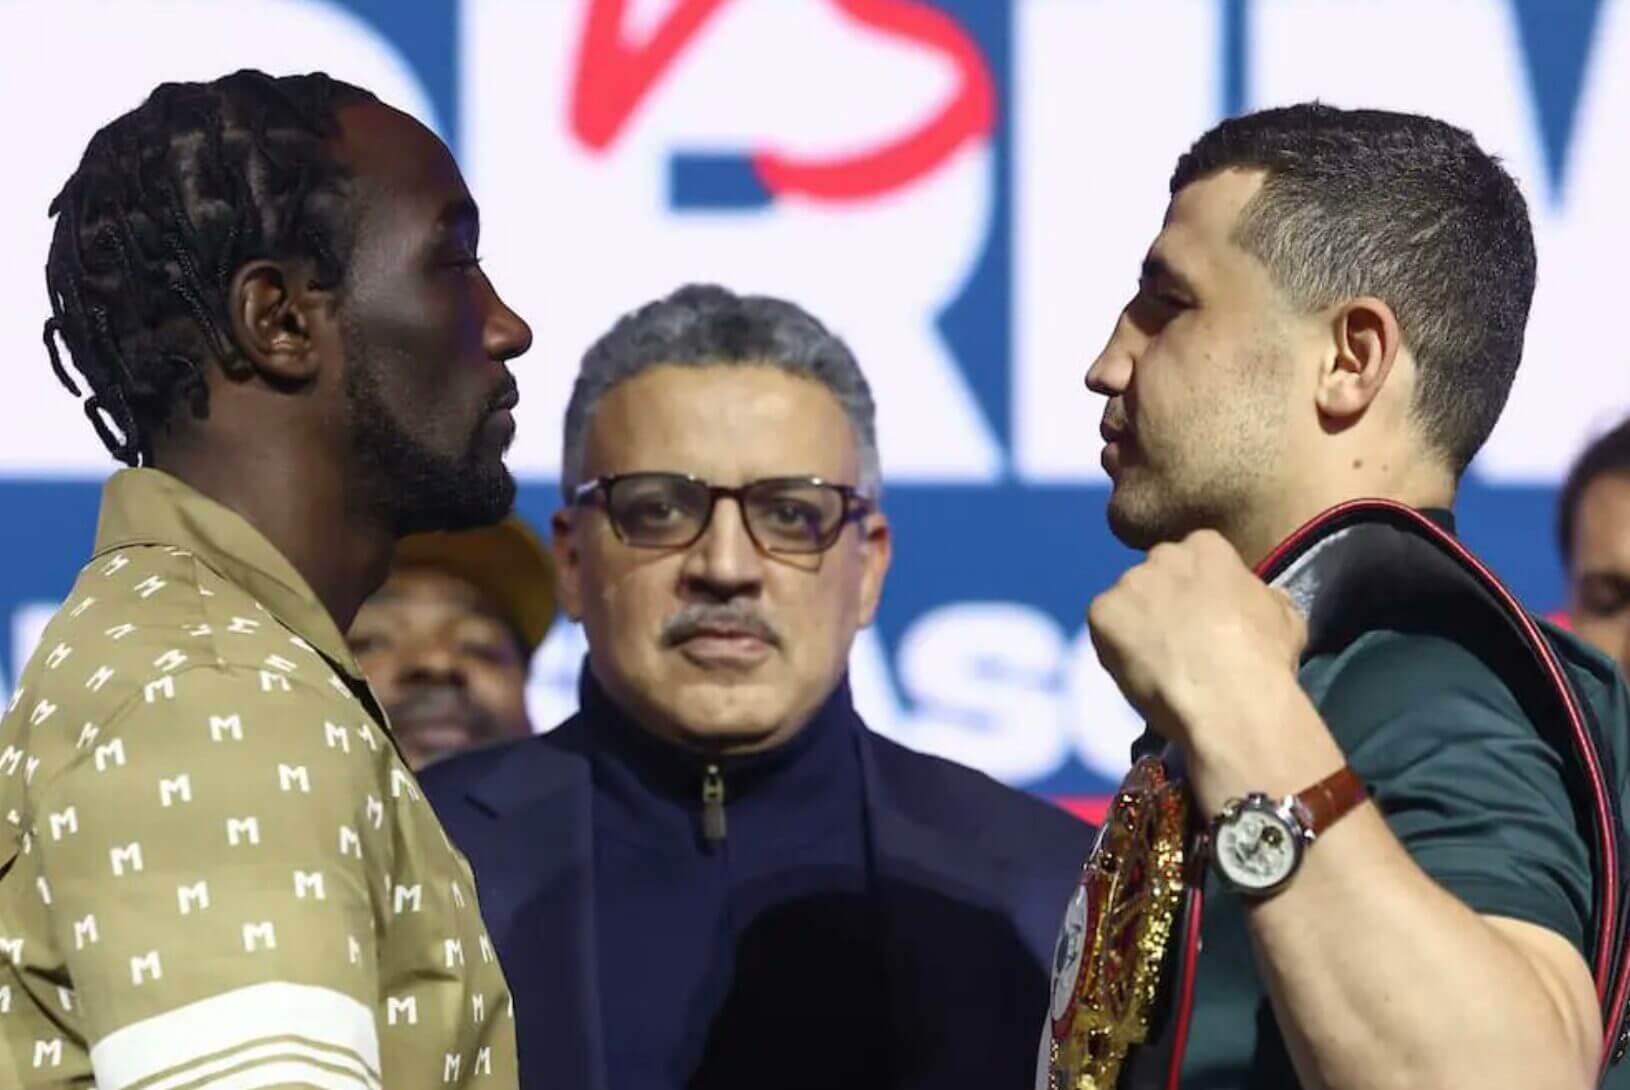 Crawford Ready To Destroy Madrimov - 'We’re Here To Collect Undisputed'